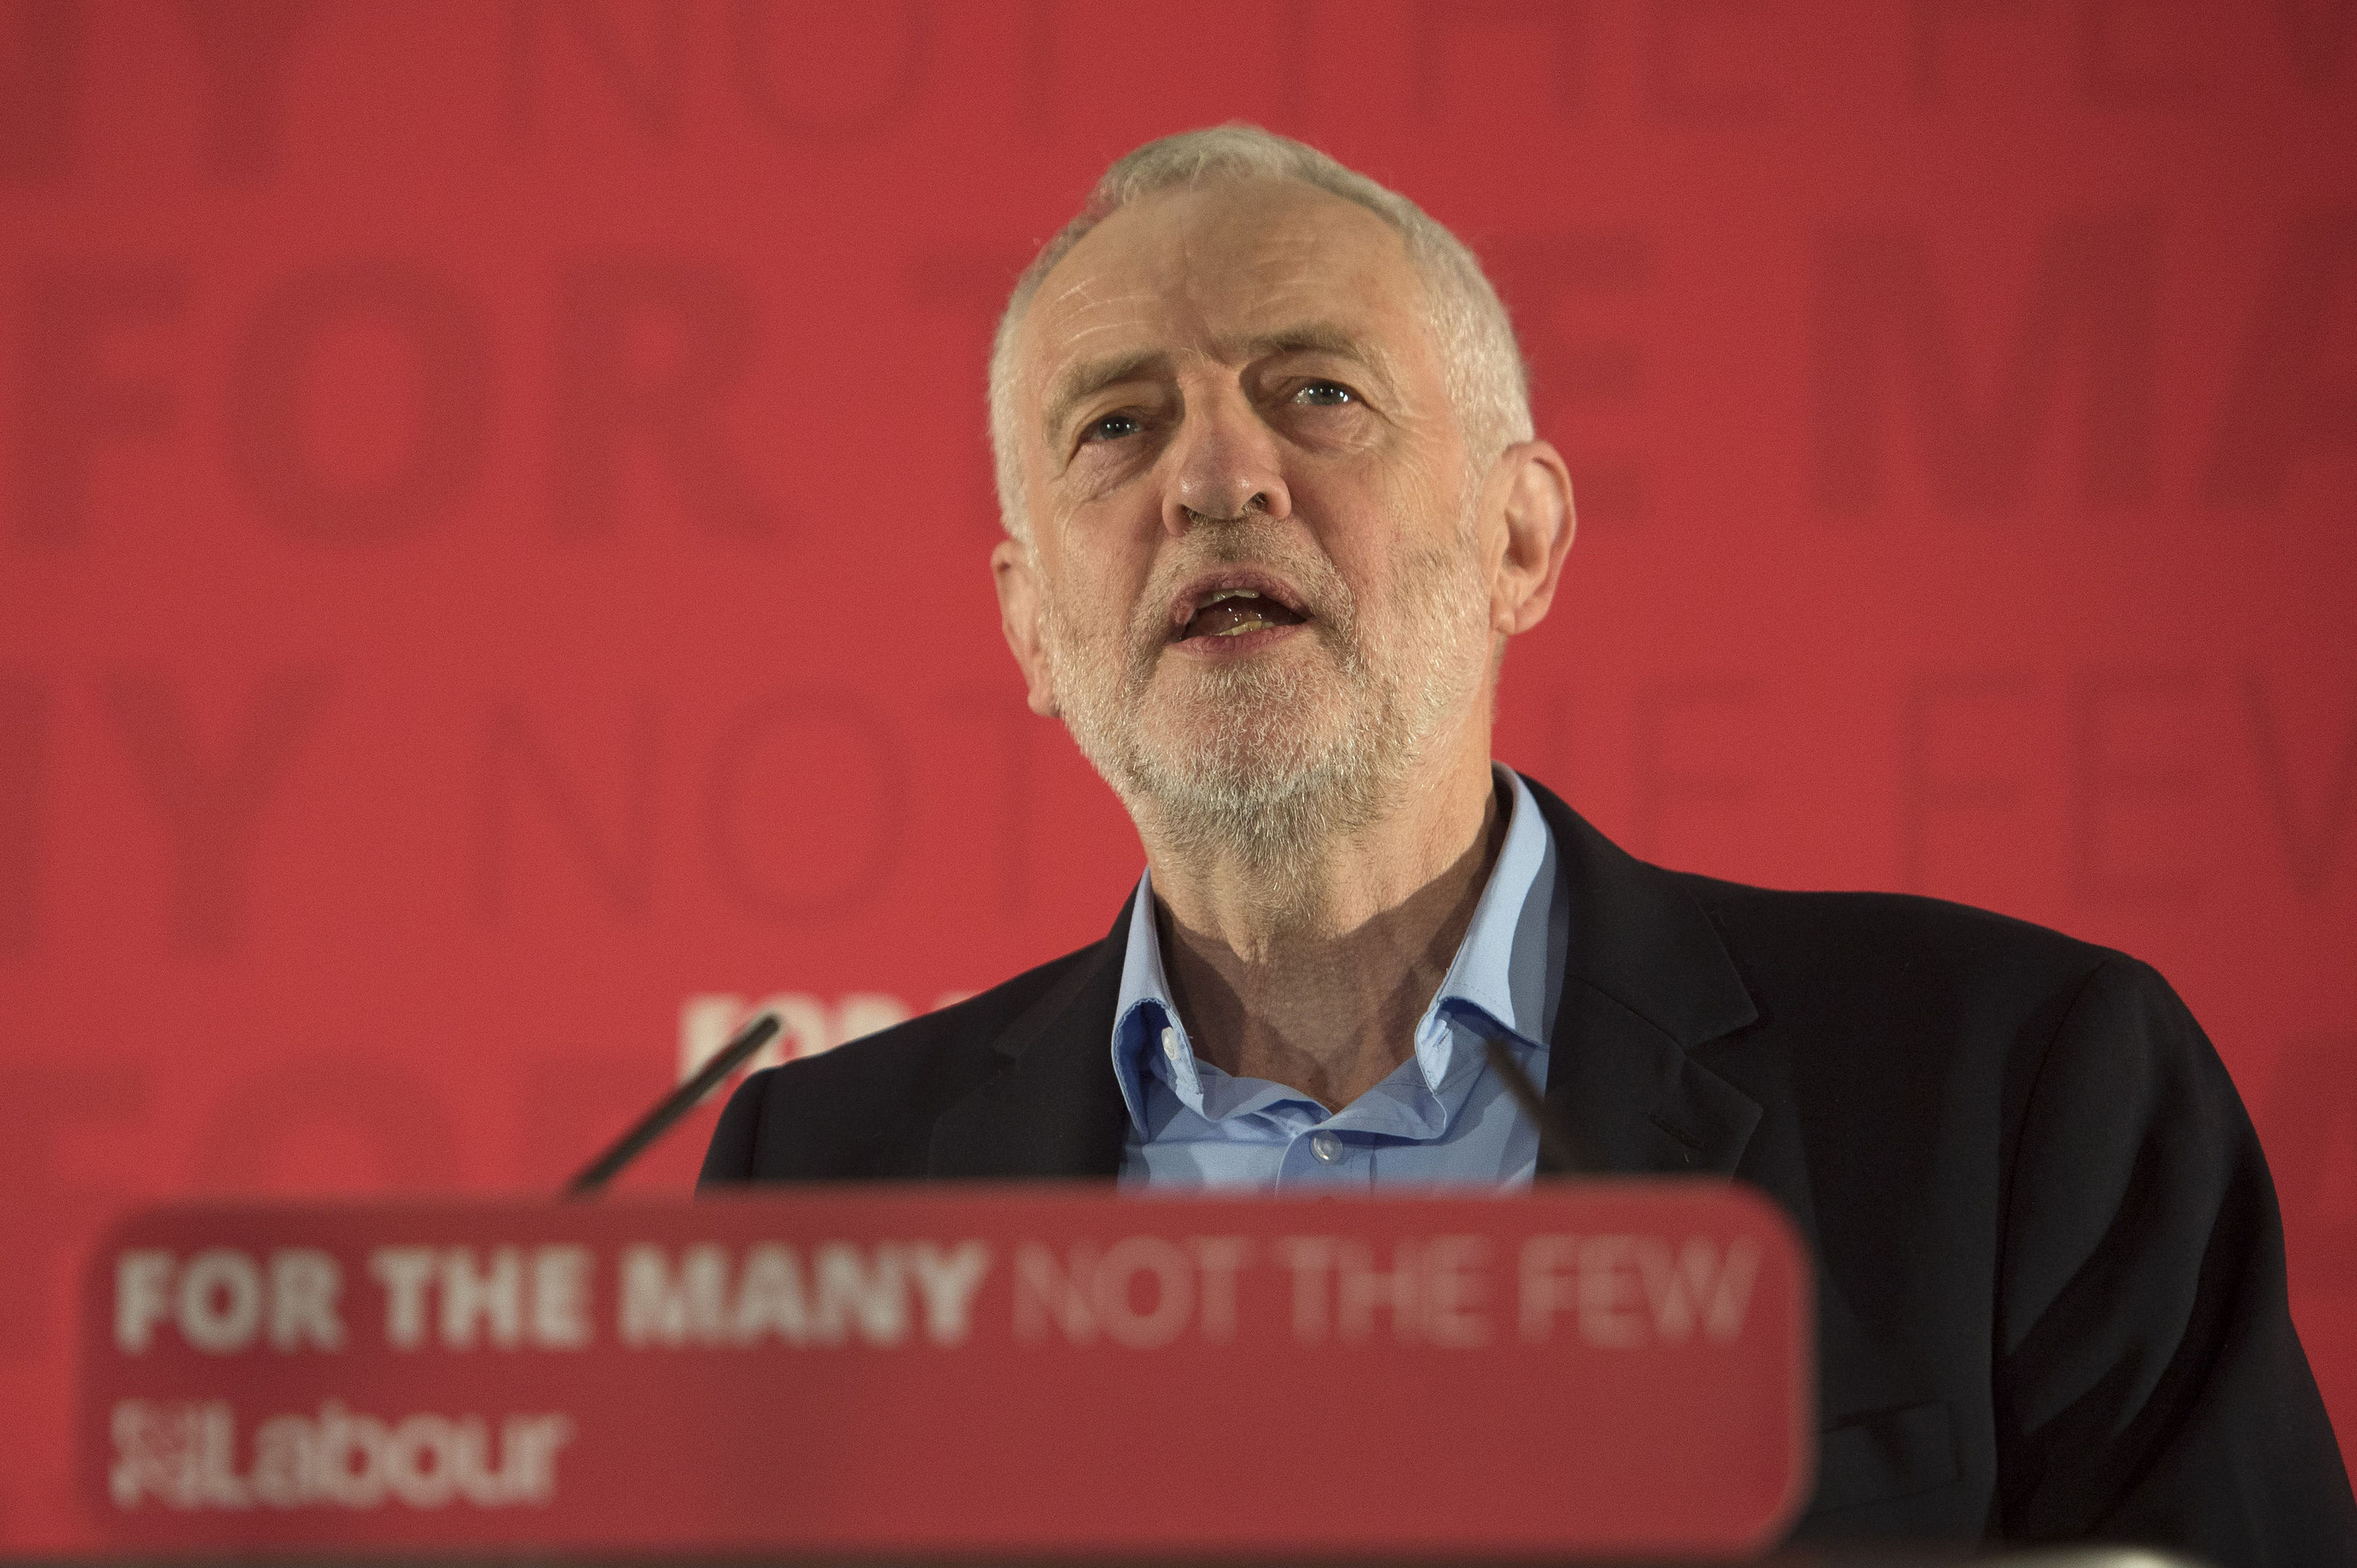 Labour leader Jeremy Corbyn gives a speech in east London where he made a direct plea to young people to "step up" and register to vote to stop the Conservatives "holding them back". Victoria Jones/PA Wire